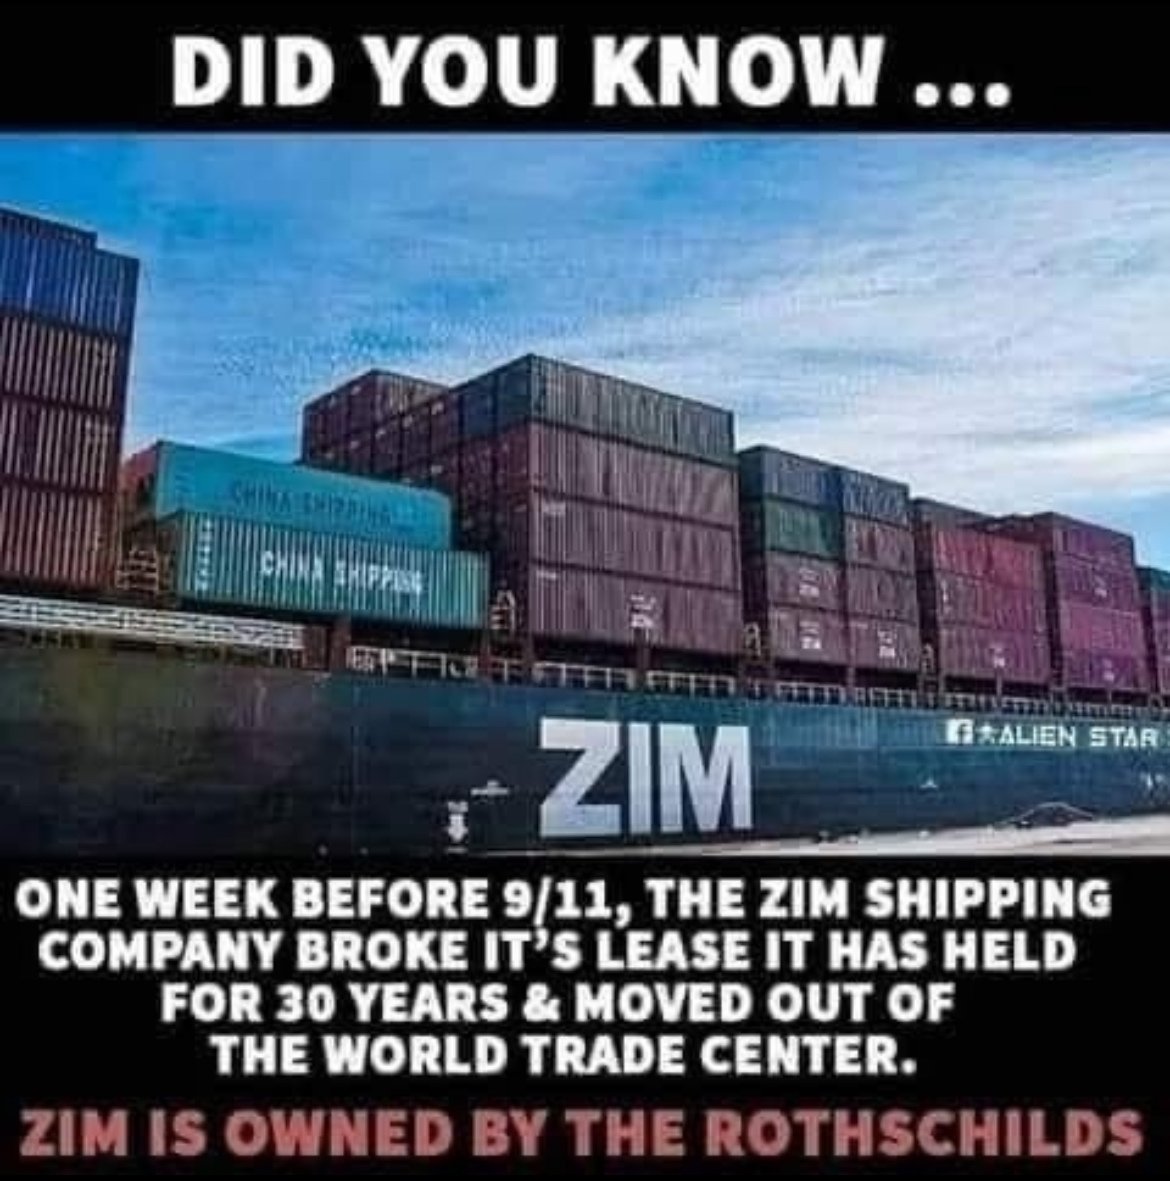 Wow, what a coincidence 👇 or is it? I researched Zim & found it means 'fleet of ships' in Hebrew. I also found Zim has several well known shareholders including Blackrock, Morgan Stanley, & Goldman Sachs. The meme maker says Zim is owned by the Rothschilds. It is a Jewish…